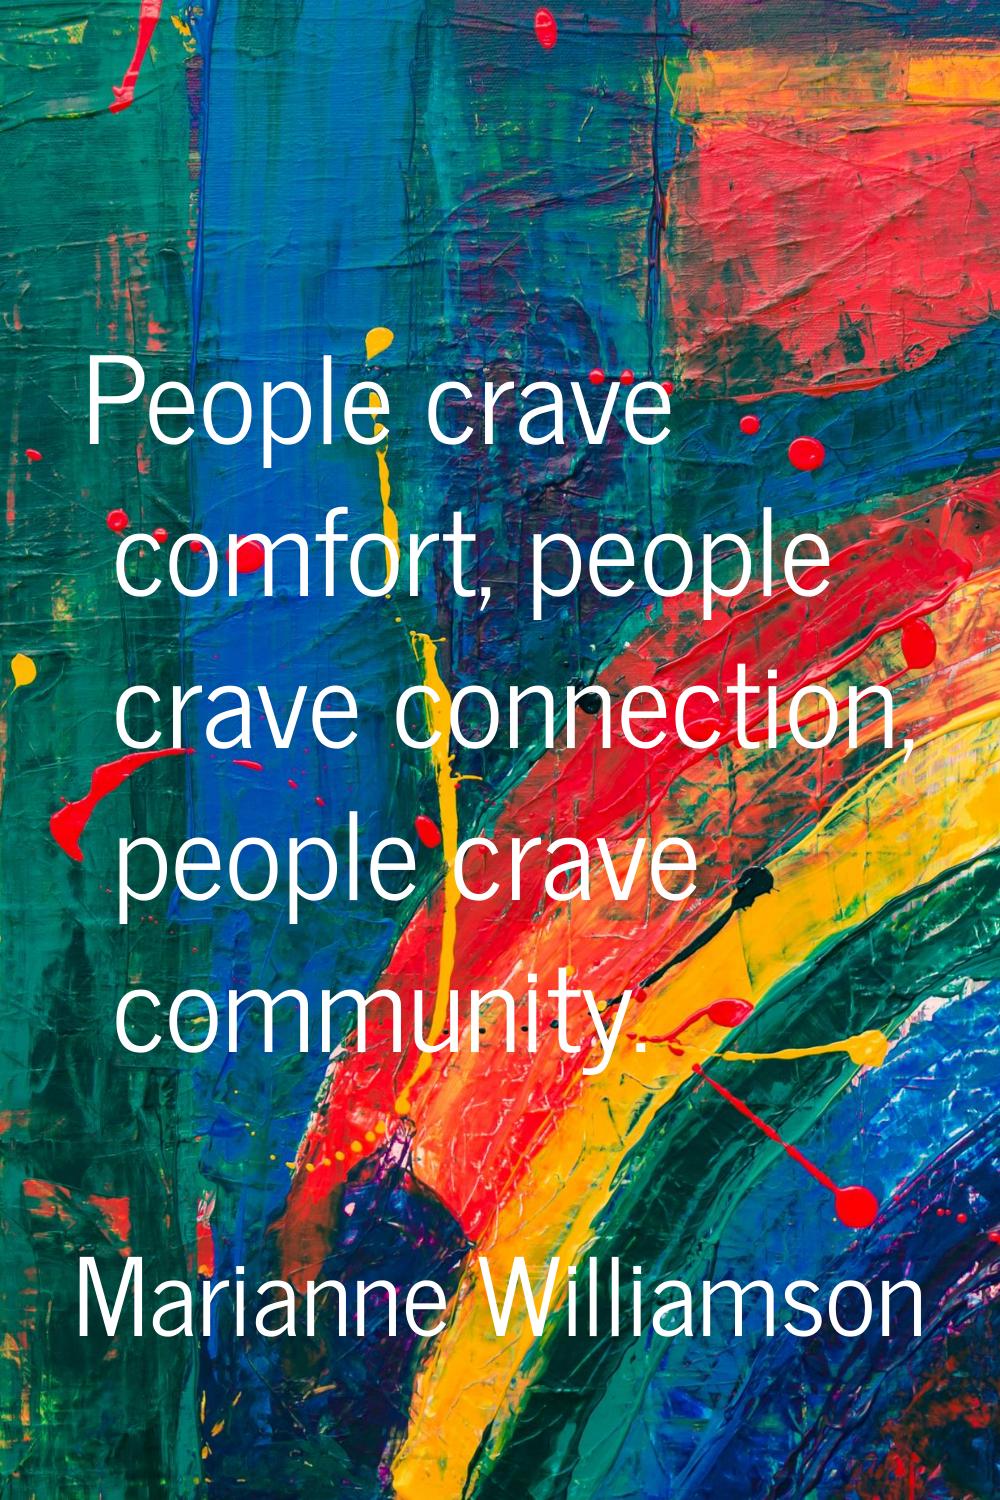 People crave comfort, people crave connection, people crave community.